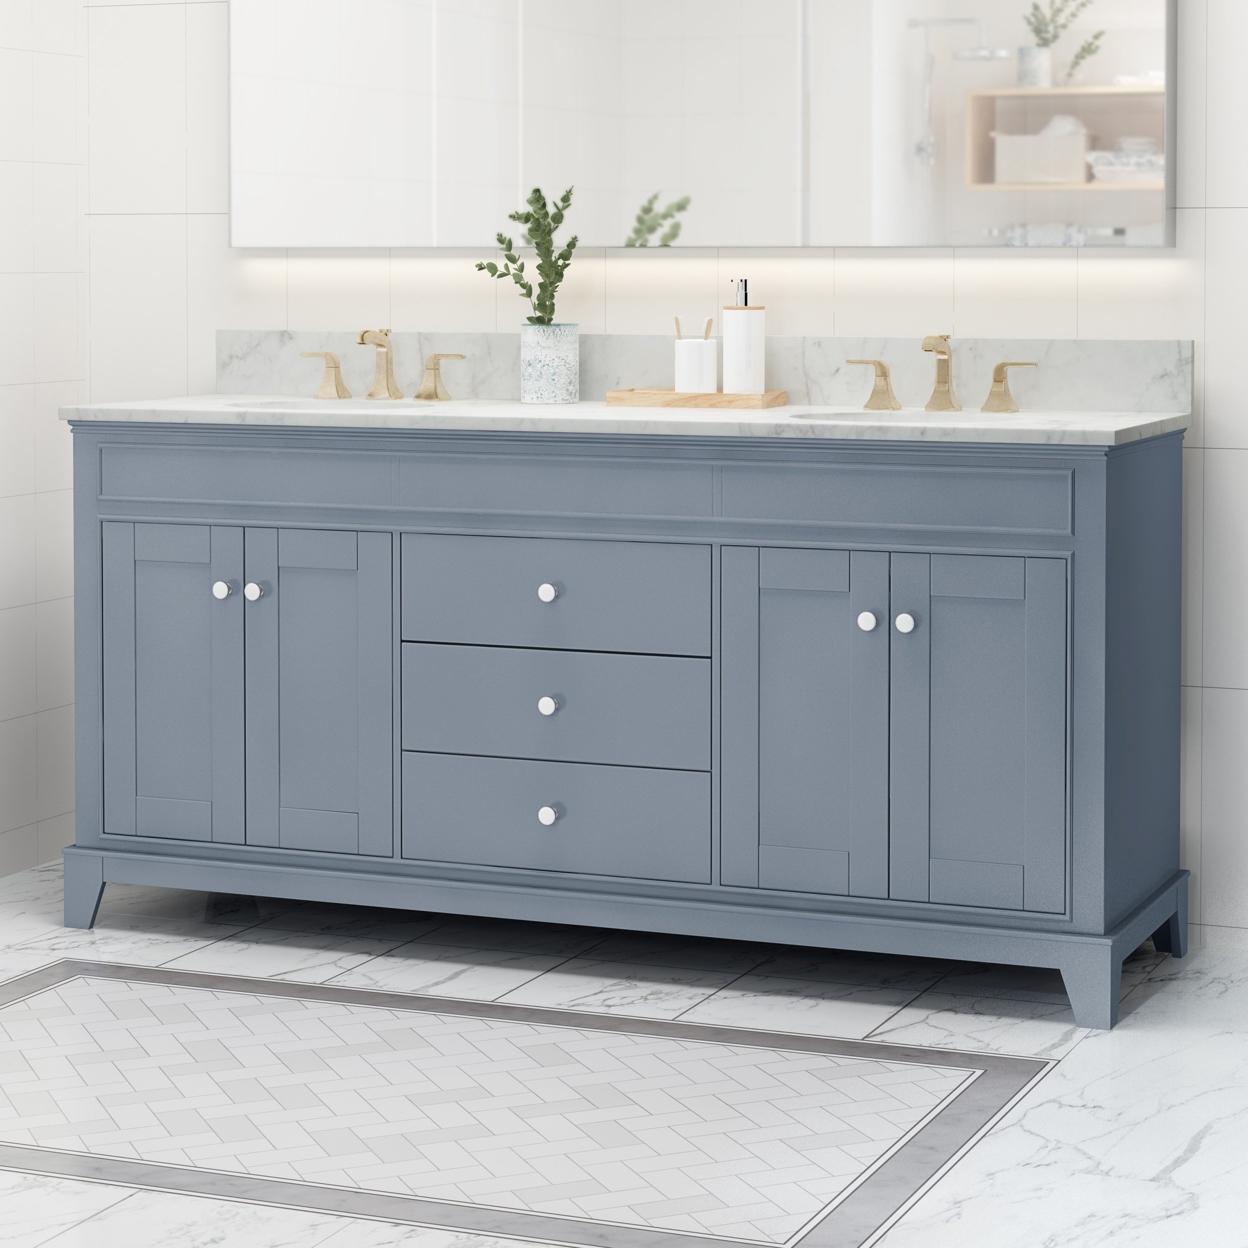 Feldspar Contemporary 72 Wood Double Sink Bathroom Vanity With Marble Counter Top With Carrara White Marble - Gray